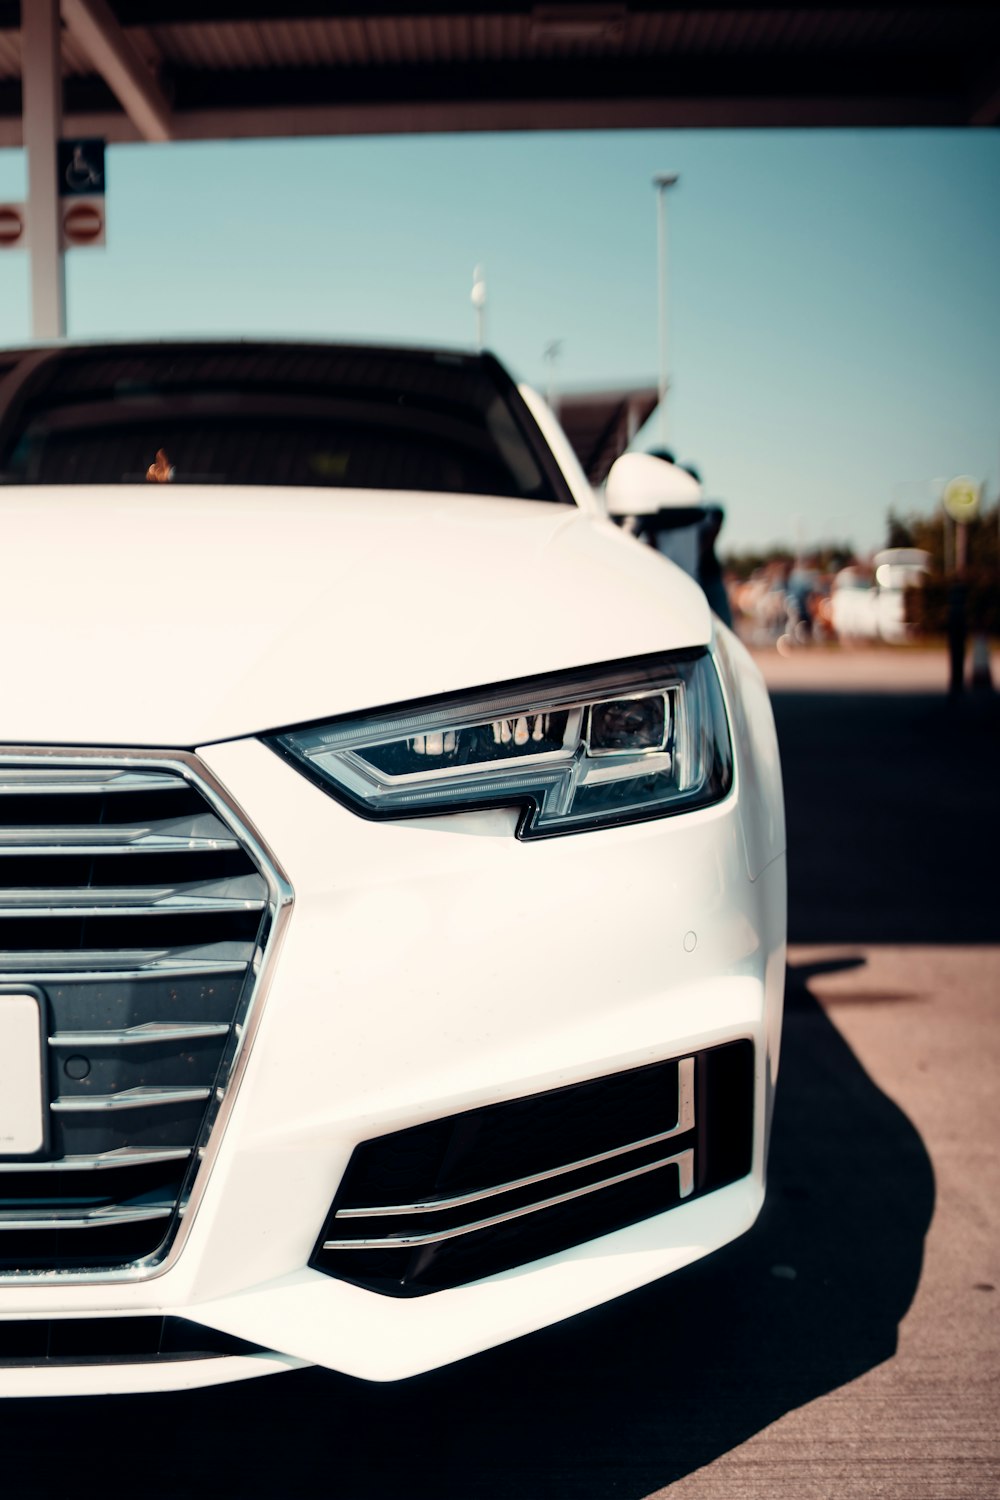 Audi A4 Pictures | Download Free Images on Unsplash